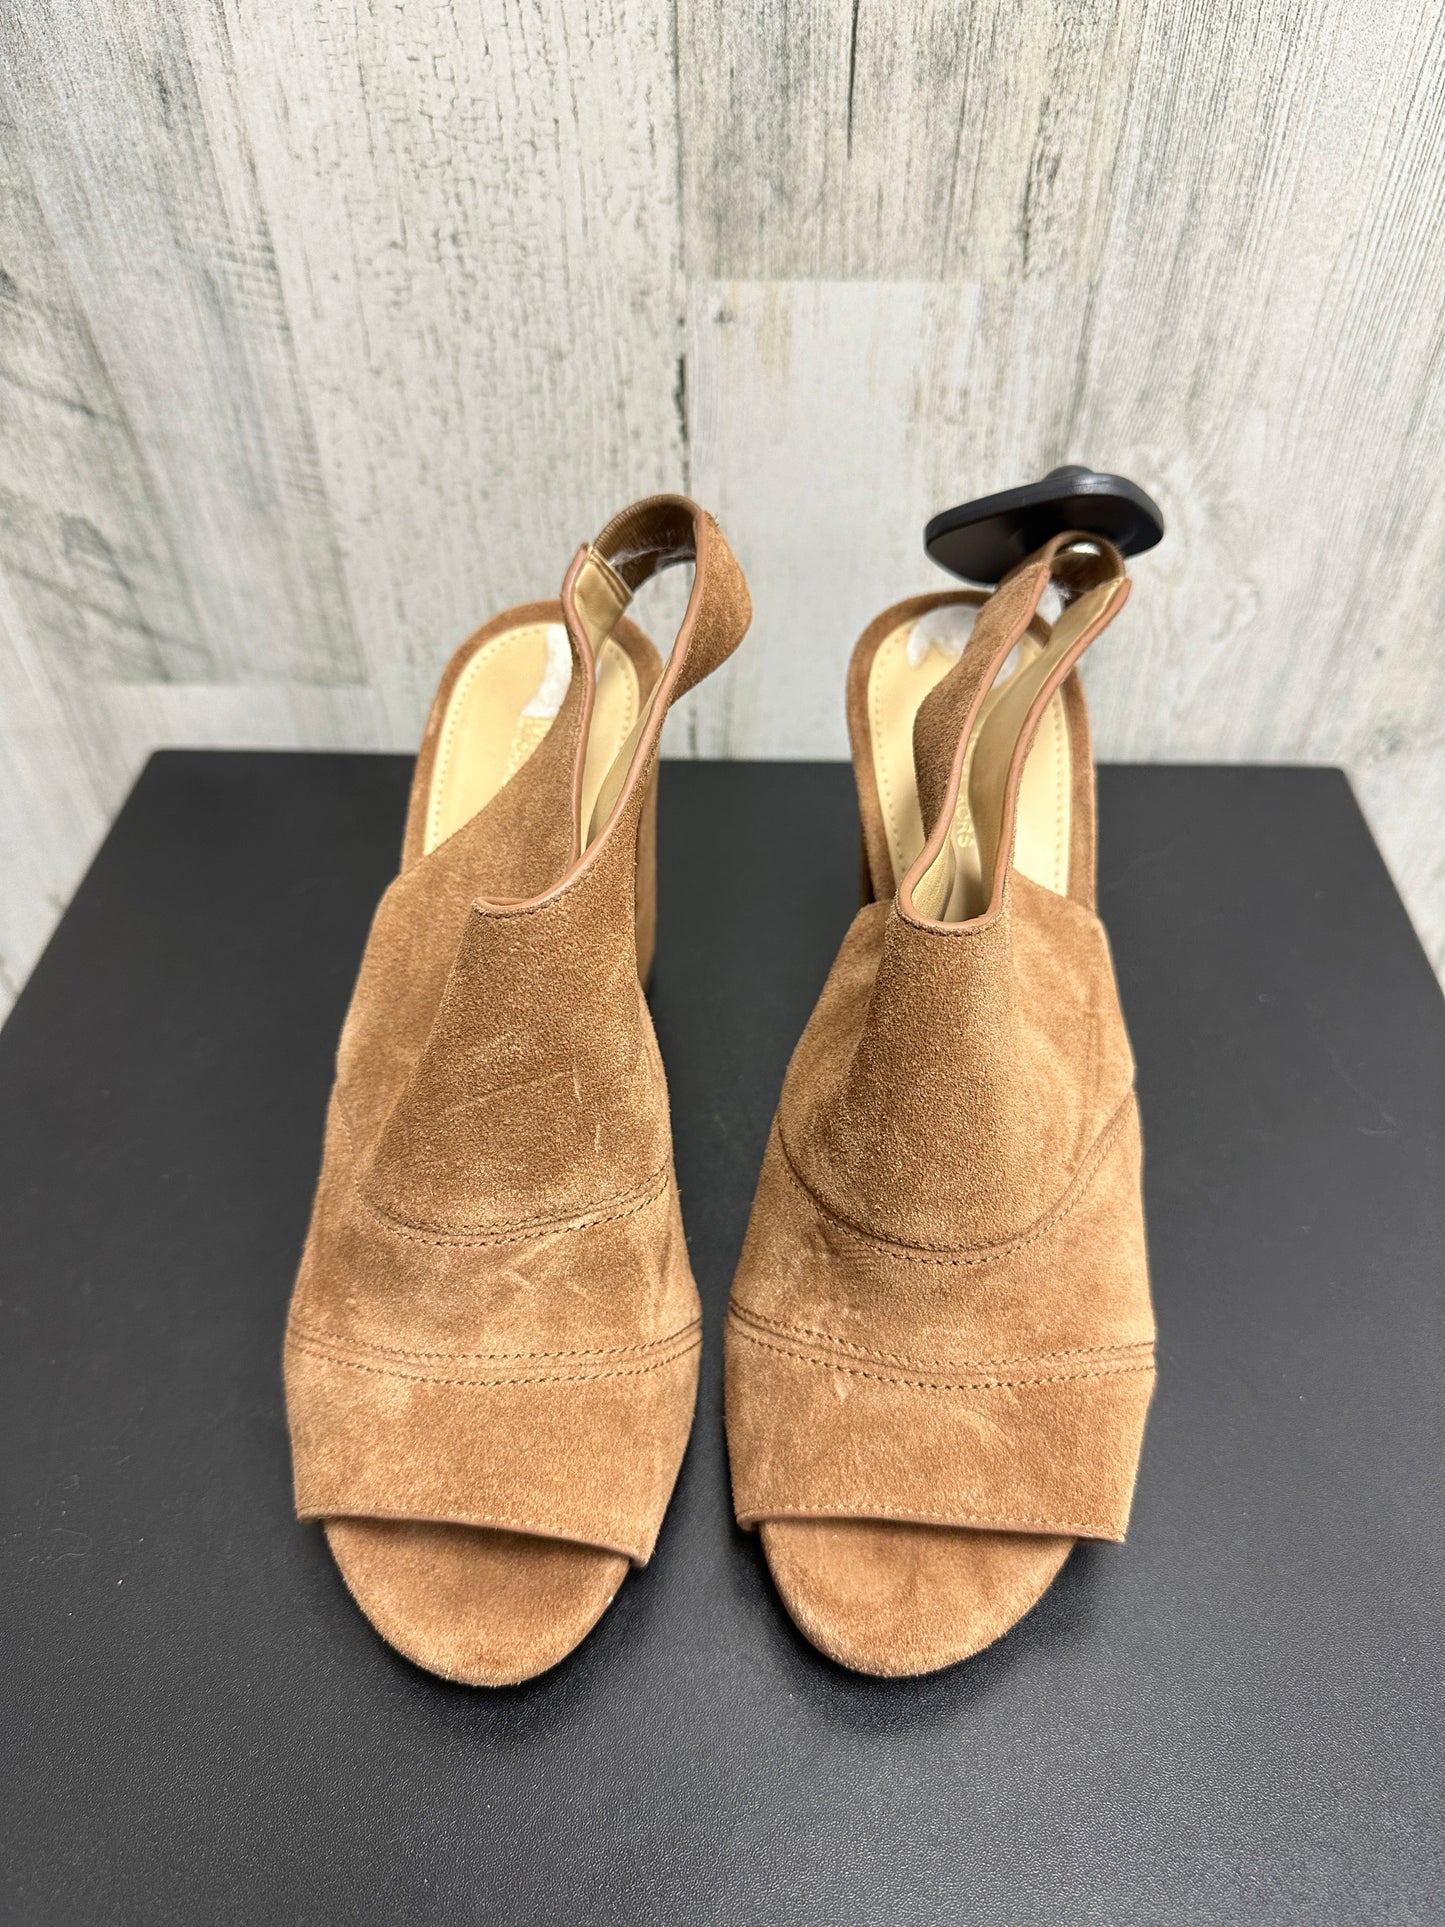 Shoes Heels Block By Michael By Michael Kors  Size: 6.5